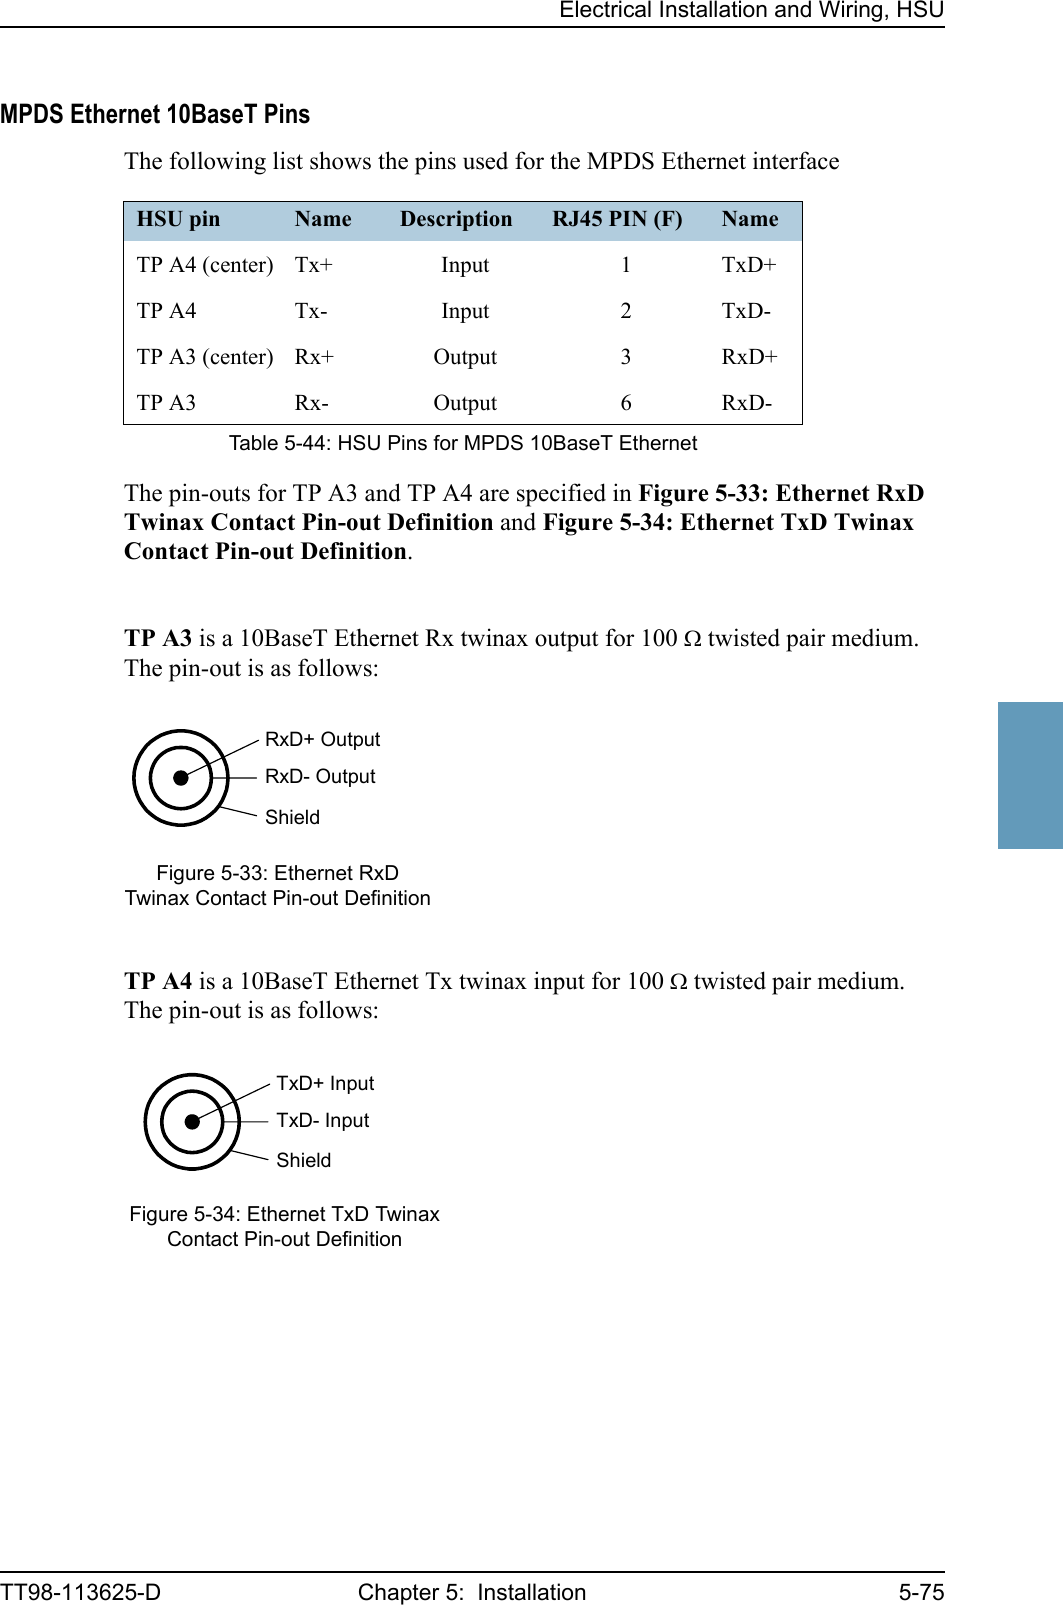 Electrical Installation and Wiring, HSUTT98-113625-D Chapter 5:  Installation 5-755555MPDS Ethernet 10BaseT PinsThe following list shows the pins used for the MPDS Ethernet interfaceThe pin-outs for TP A3 and TP A4 are specified in Figure 5-33: Ethernet RxD Twinax Contact Pin-out Definition and Figure 5-34: Ethernet TxD Twinax Contact Pin-out Definition.TP A3 is a 10BaseT Ethernet Rx twinax output for 100 Ω twisted pair medium. The pin-out is as follows:TP A4 is a 10BaseT Ethernet Tx twinax input for 100 Ω twisted pair medium. The pin-out is as follows:HSU pin Name Description RJ45 PIN (F) NameTP A4 (center) Tx+ Input 1 TxD+TP A4 Tx- Input 2 TxD-TP A3 (center) Rx+ Output 3 RxD+TP A3 Rx- Output 6 RxD-Table 5-44: HSU Pins for MPDS 10BaseT EthernetFigure 5-33: Ethernet RxD Twinax Contact Pin-out DefinitionFigure 5-34: Ethernet TxD Twinax Contact Pin-out DefinitionShieldRxD+ OutputRxD- OutputShieldTxD+ InputTxD- Input